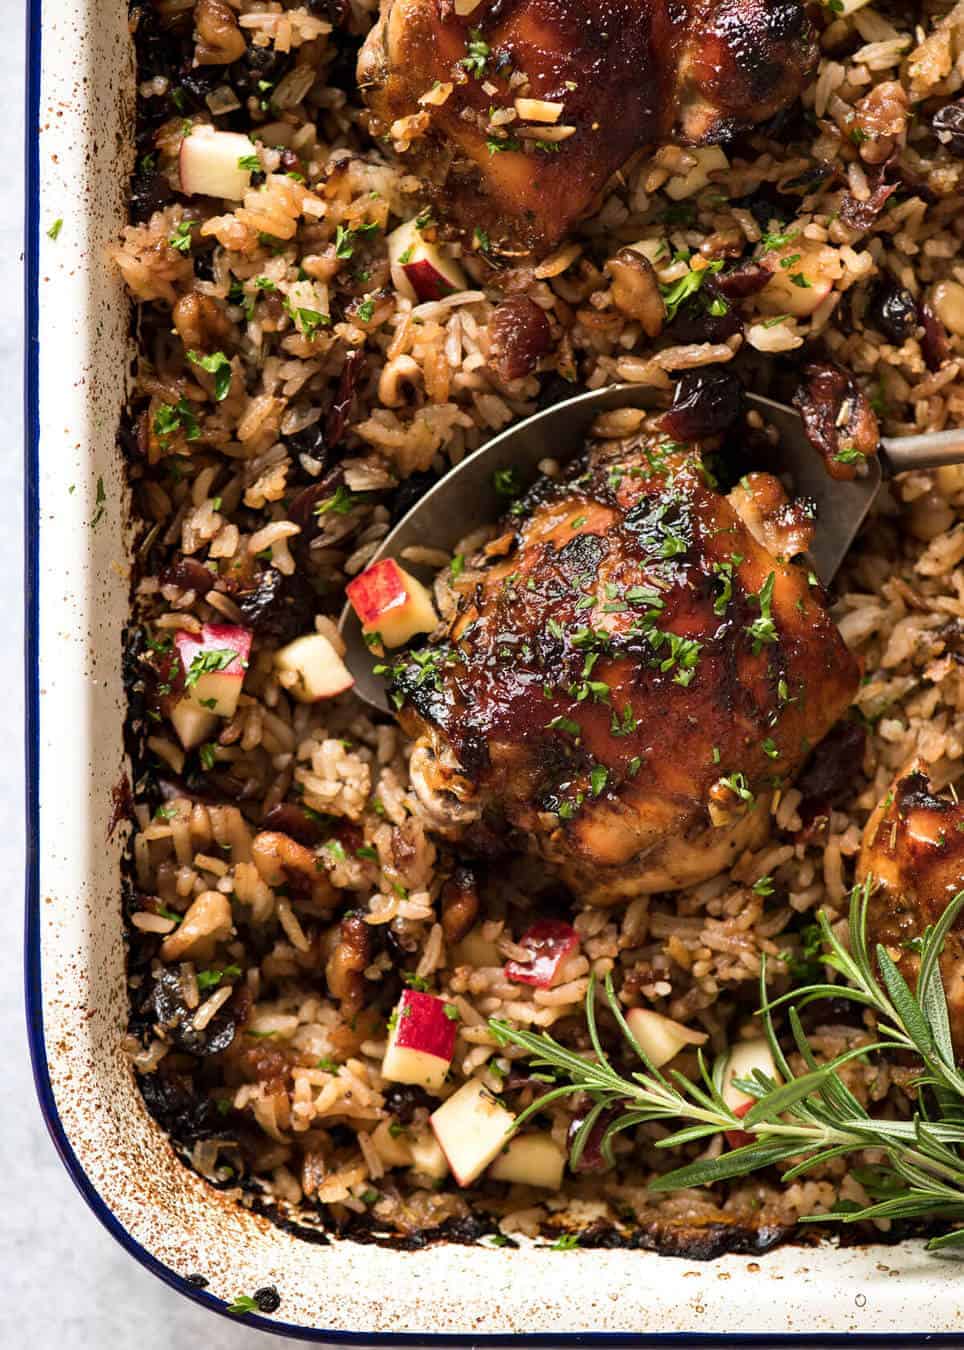 A flavour loaded one-pan, quick midweek dinner - Baked Chicken and Rice Pilaf with Cranberries, Walnuts and Apple. The smell when this is cooking is amazing! recipetineats.com